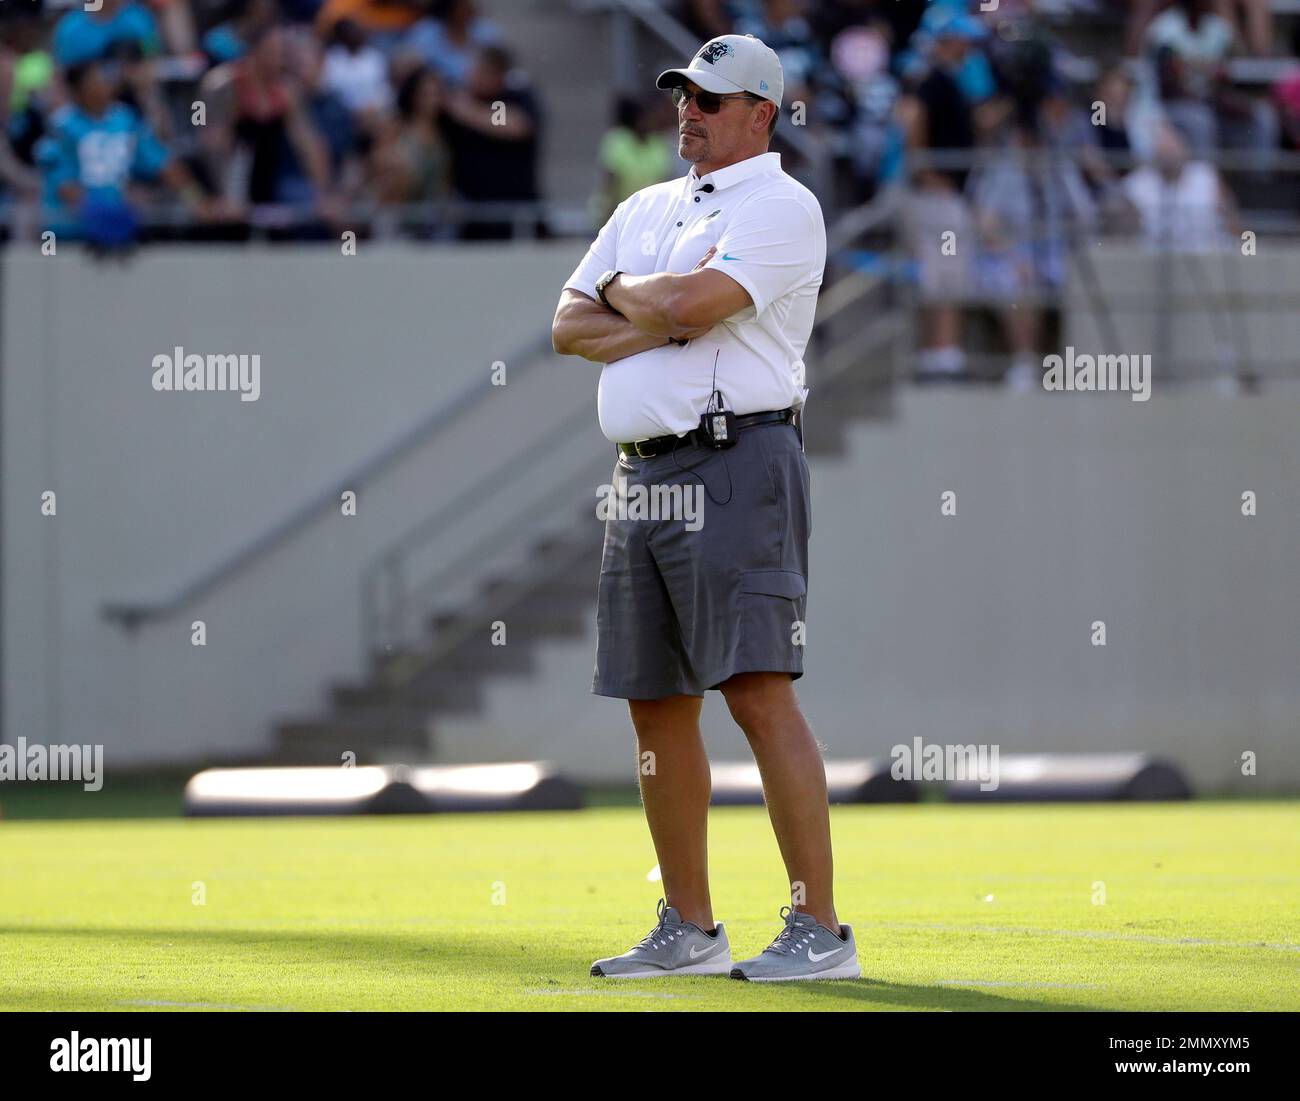 Carolina Panthers head coach Ron Rivera watches players during an NFL football practice at training camp in Spartanburg, S.C., Thursday, July 26, 2018. (AP Photo/Chuck Burton) Stockfoto